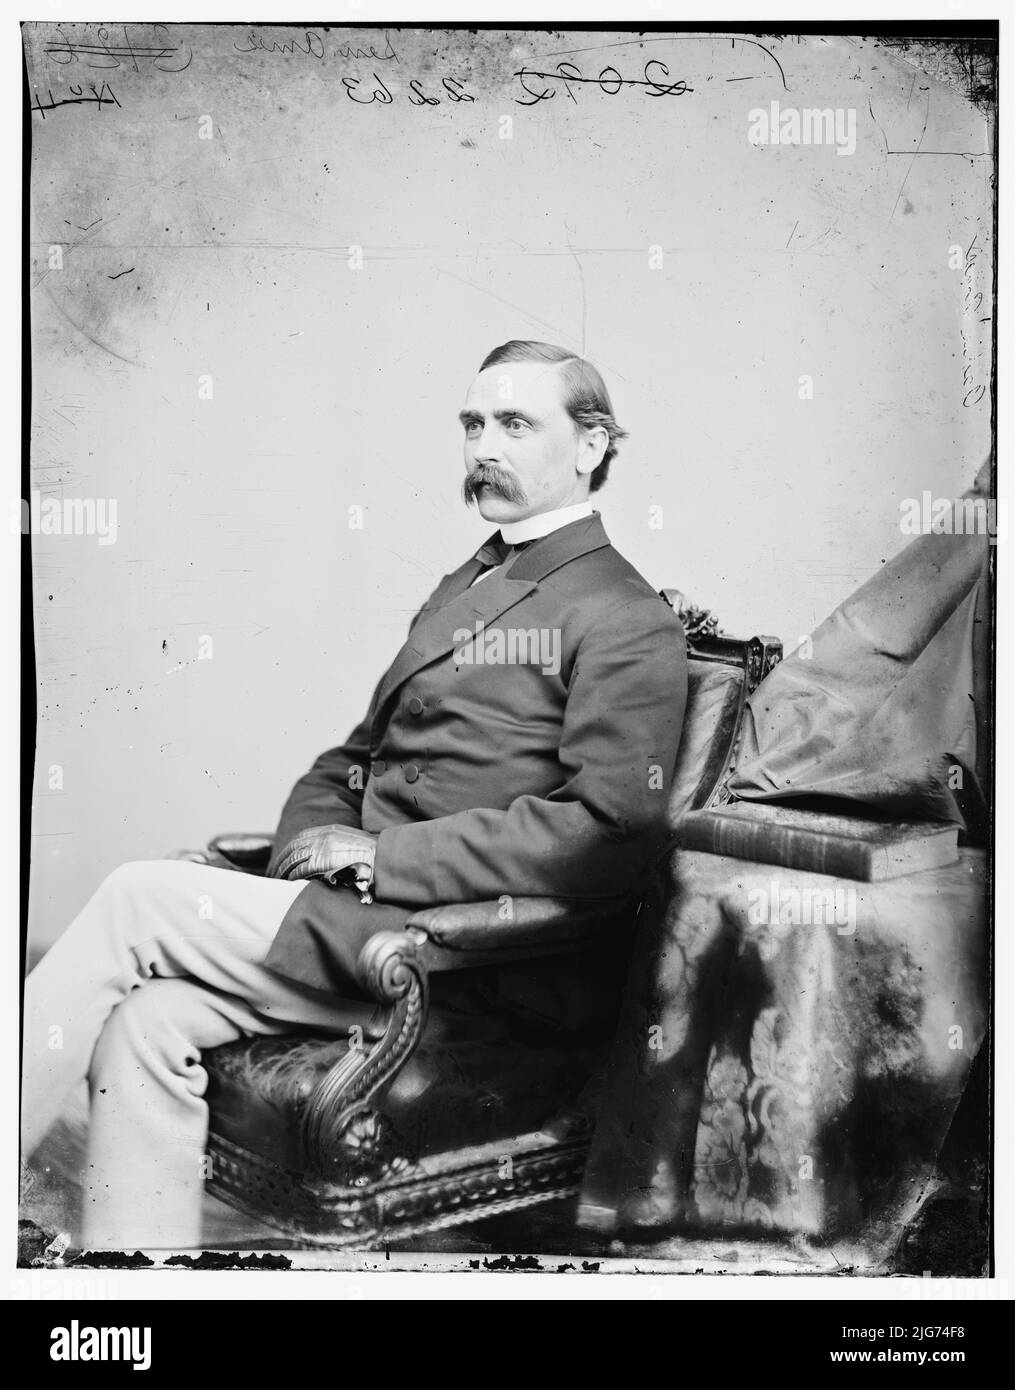 Hon. Adelbert Ames of Miss., between 1860 and 1875. [Sailor, soldier, and politician: Union Army general during the American Civil War; Governor of Mississippi]. Stock Photo